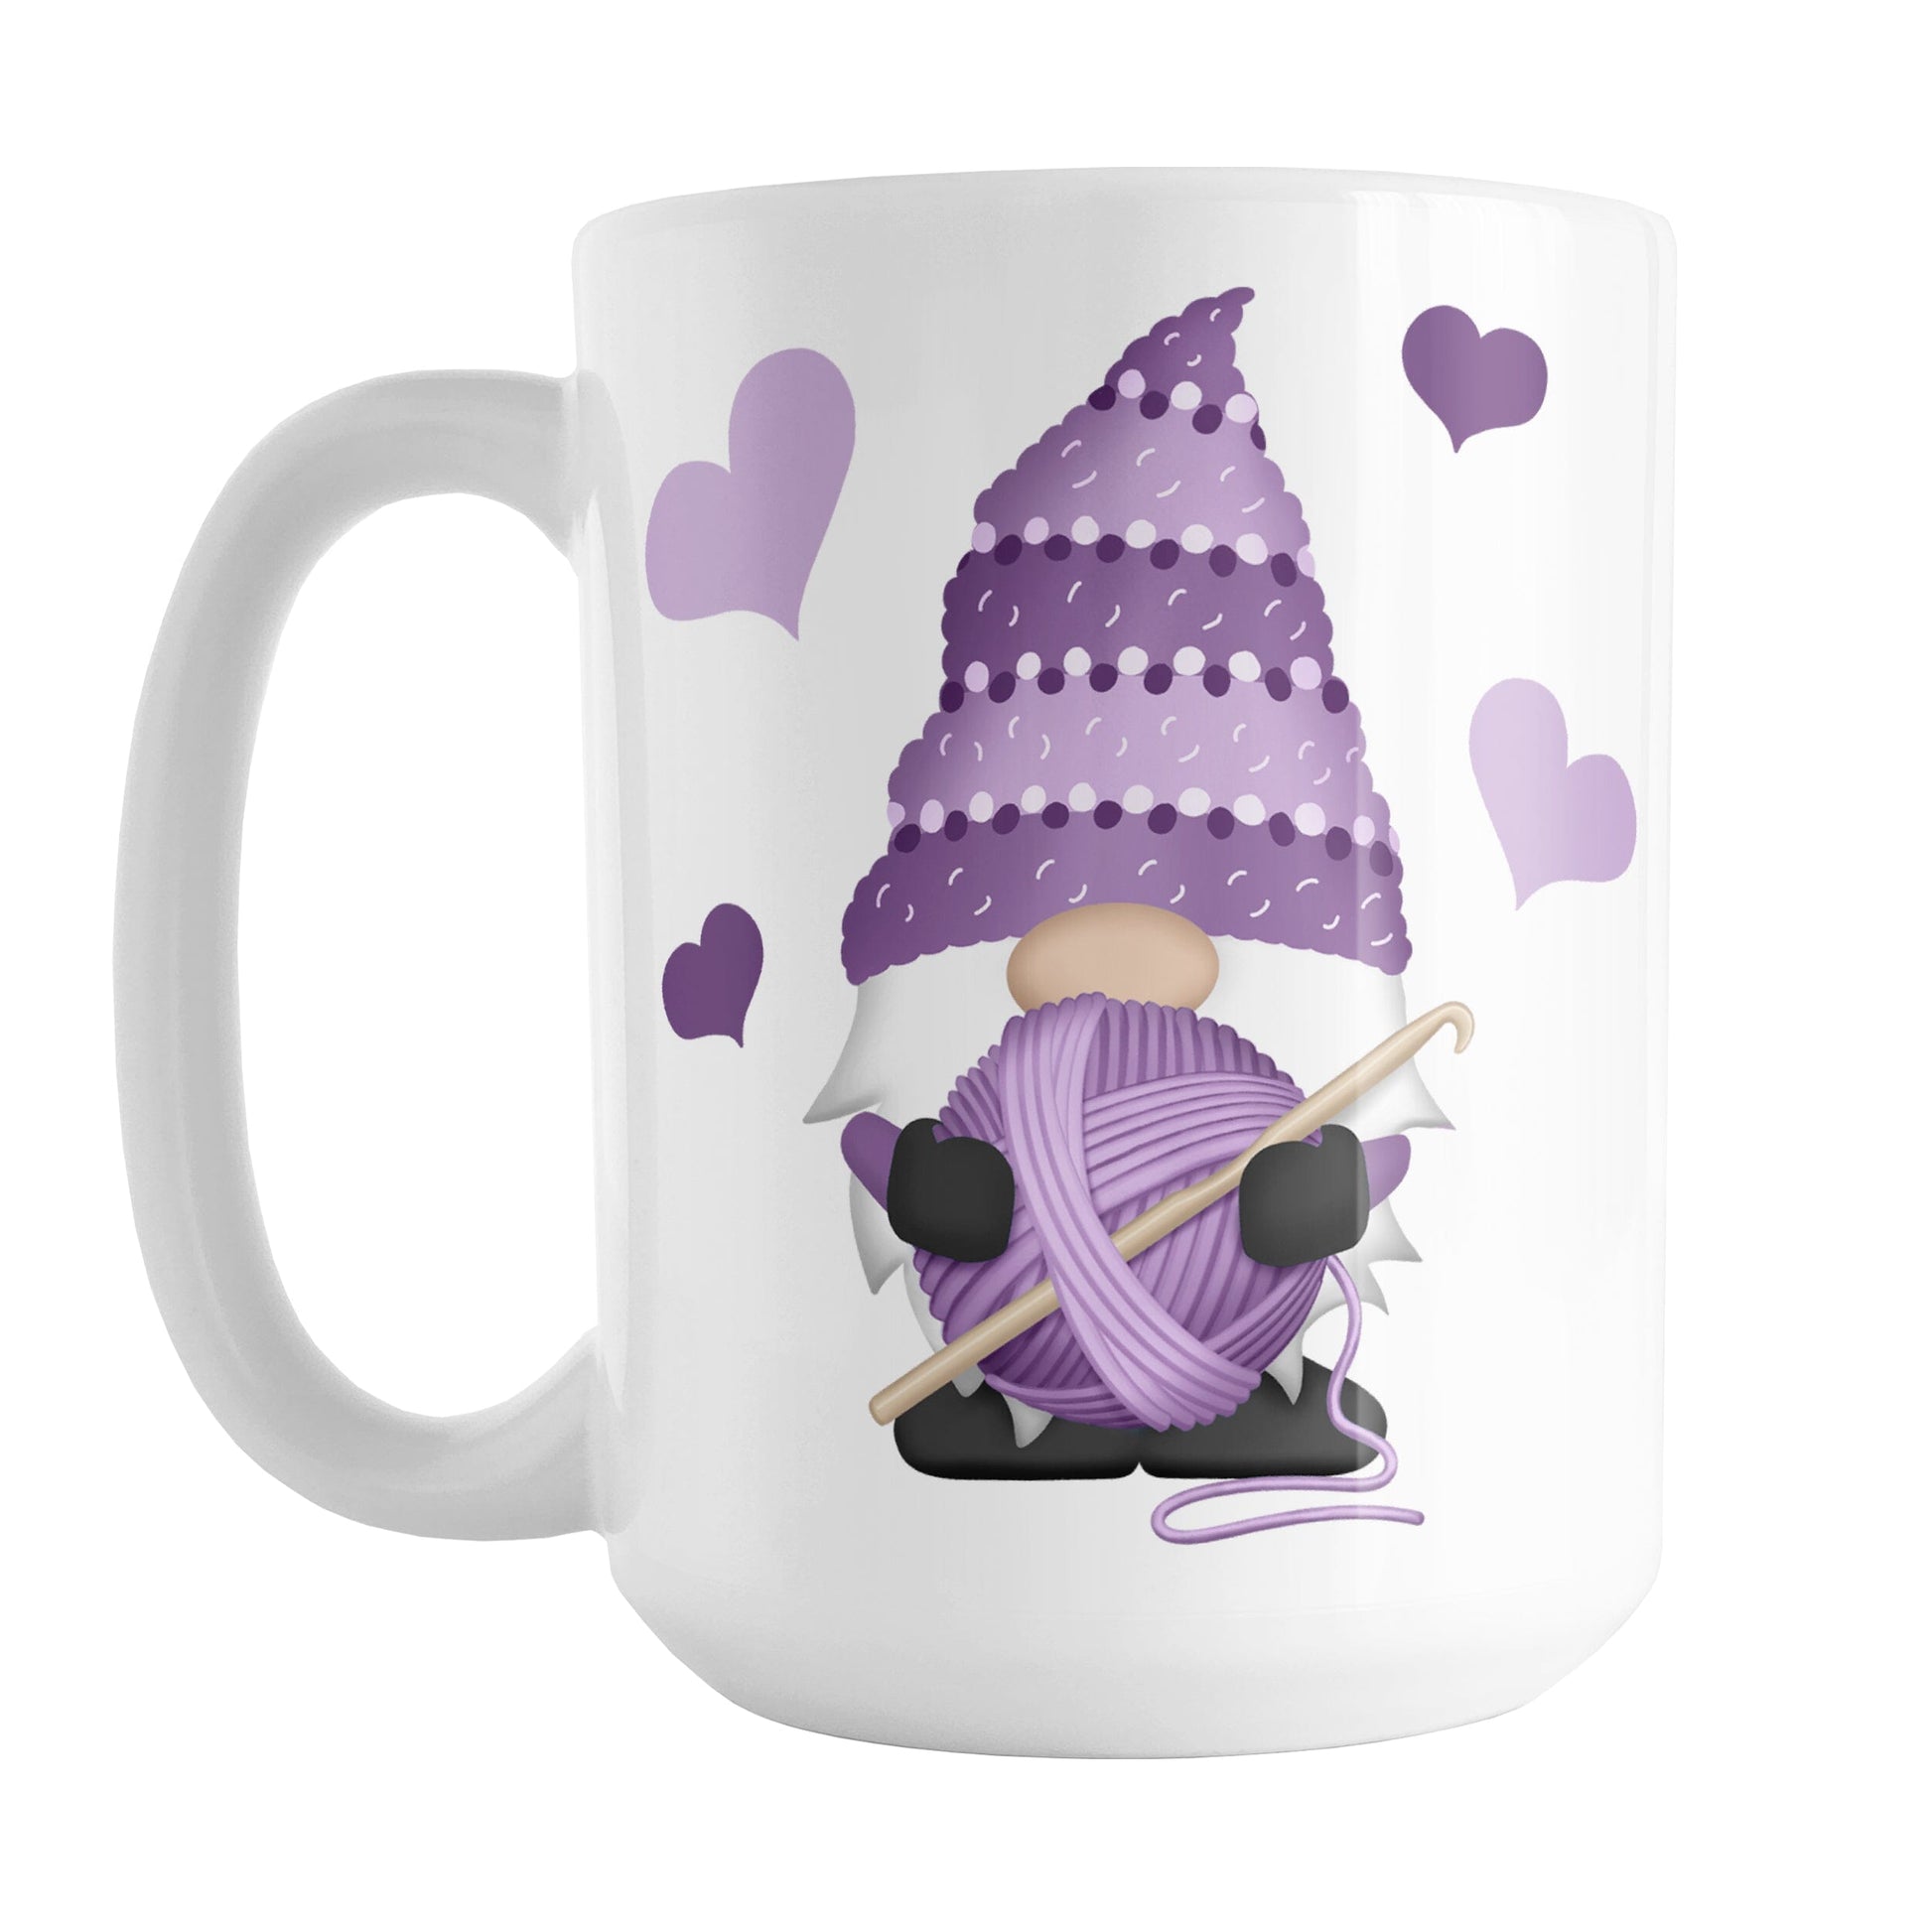 Purple Crochet Gnome Mug (15oz) at Amy's Coffee Mugs. A ceramic coffee mug designed with a cute gnome wearing a purple crochet hat while holding a ball of purple yarn and a crochet hook with purple hearts around him. This cute crochet gnome illustration is on both sides of the mug. 